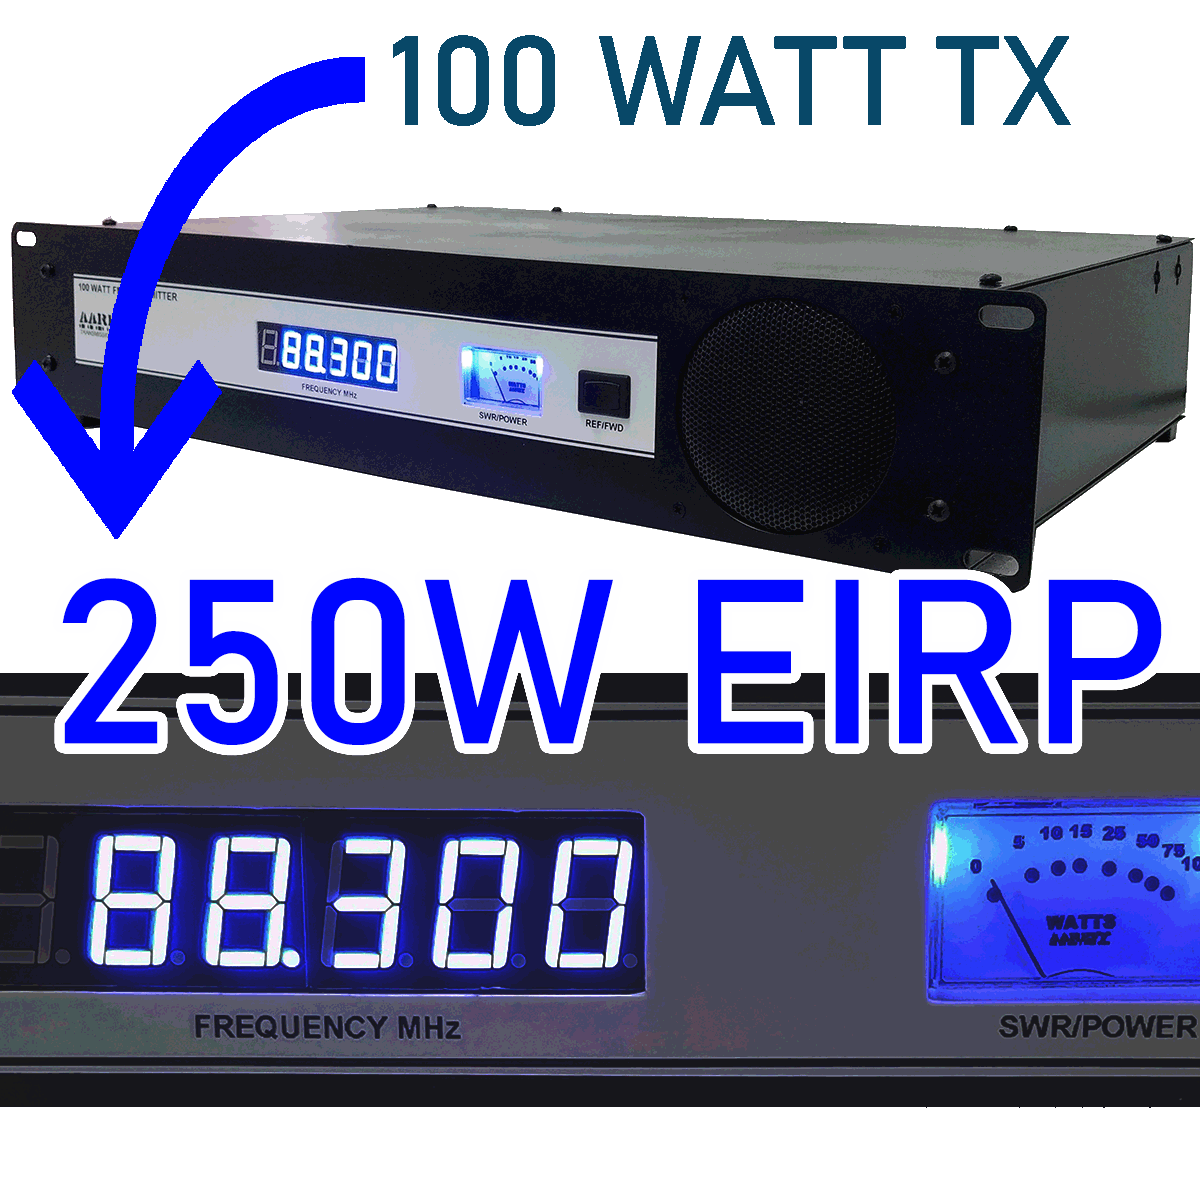 100W EIRP 19 inch professional equipment rack with FM transmitter and RF amplifier